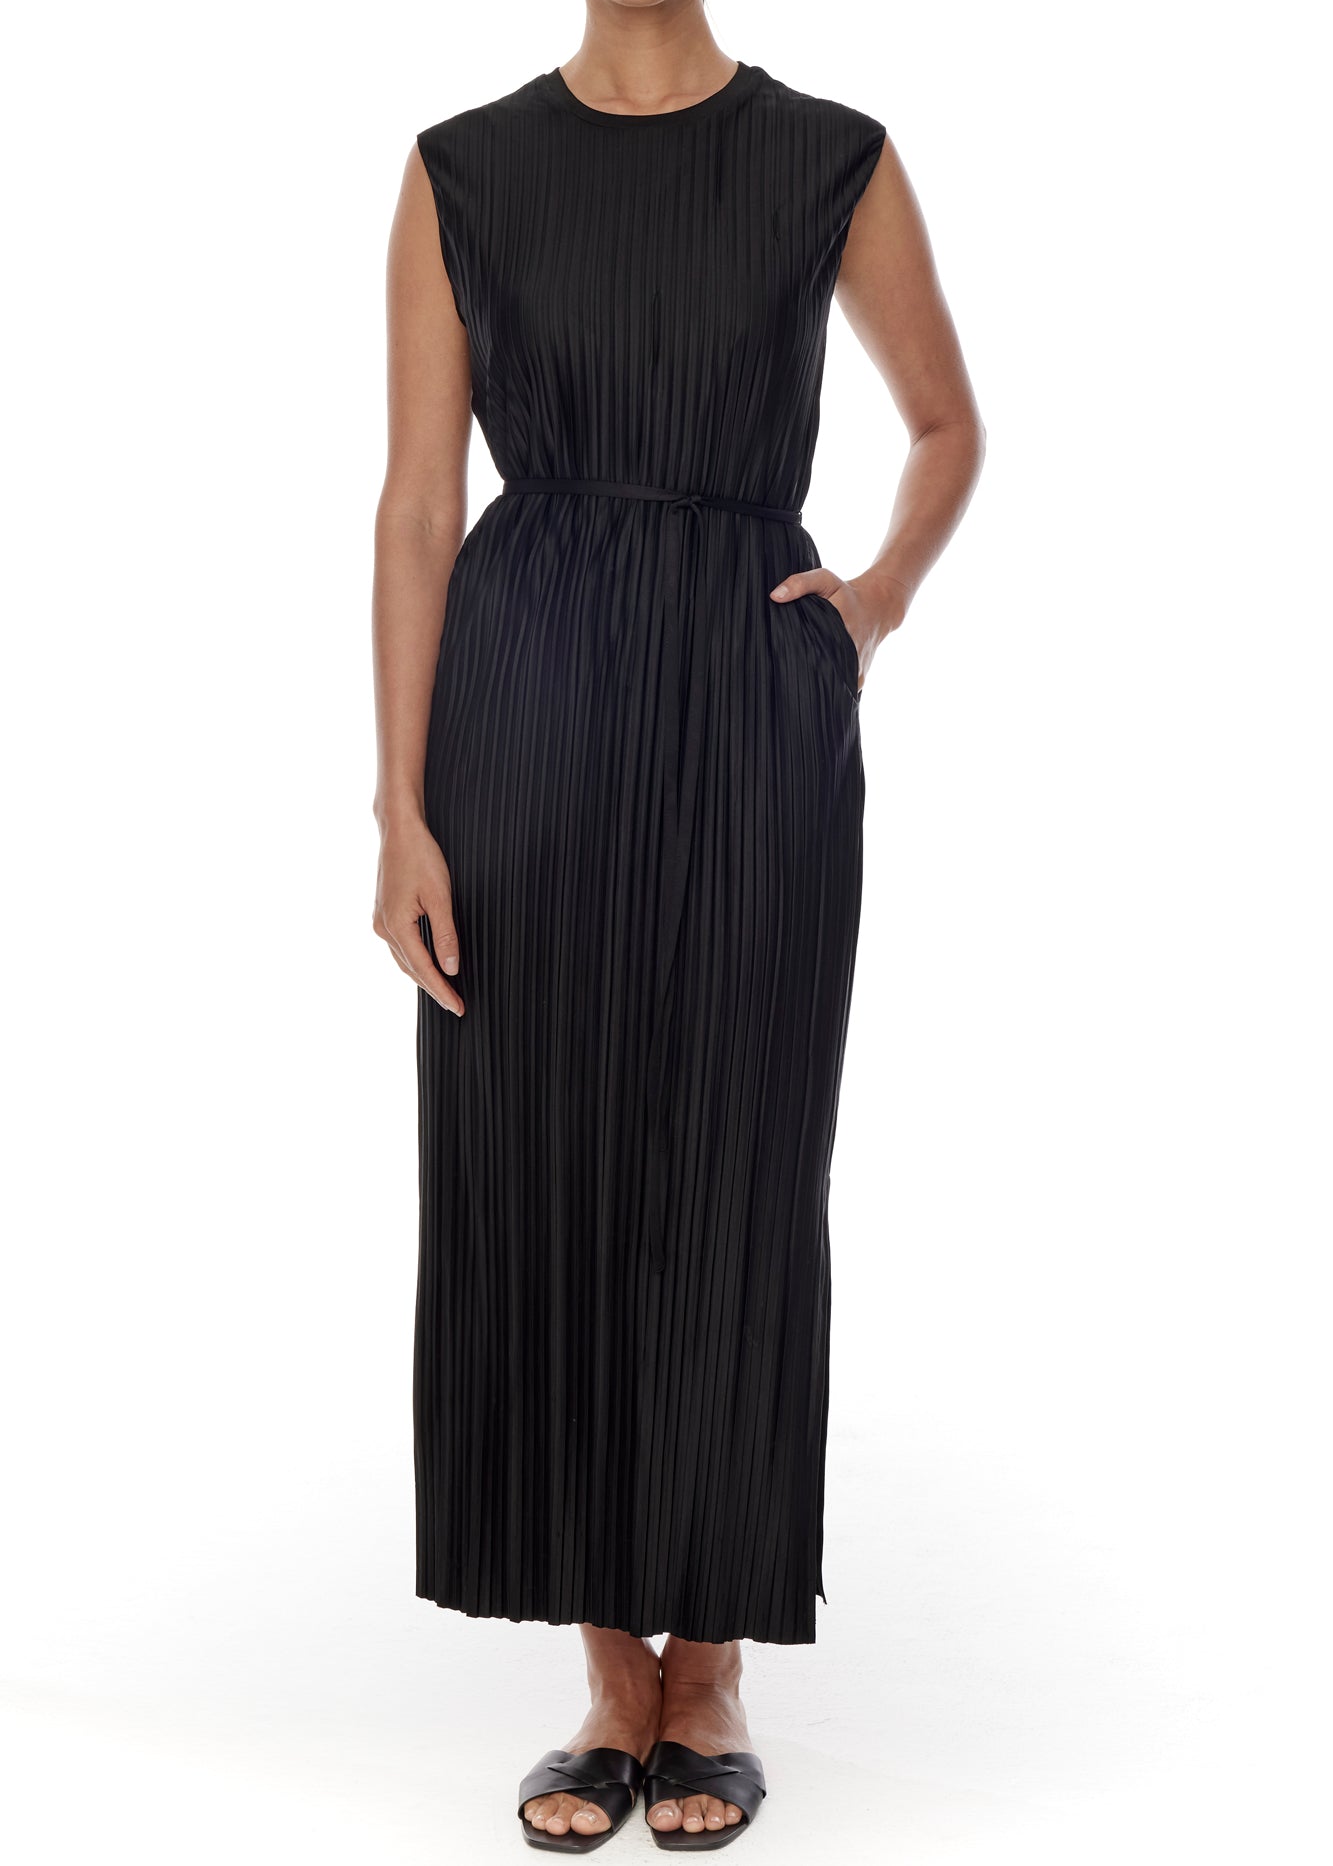 Chic pleated, sleeveless dress with crew neck, side slit and flattering waist tie in black